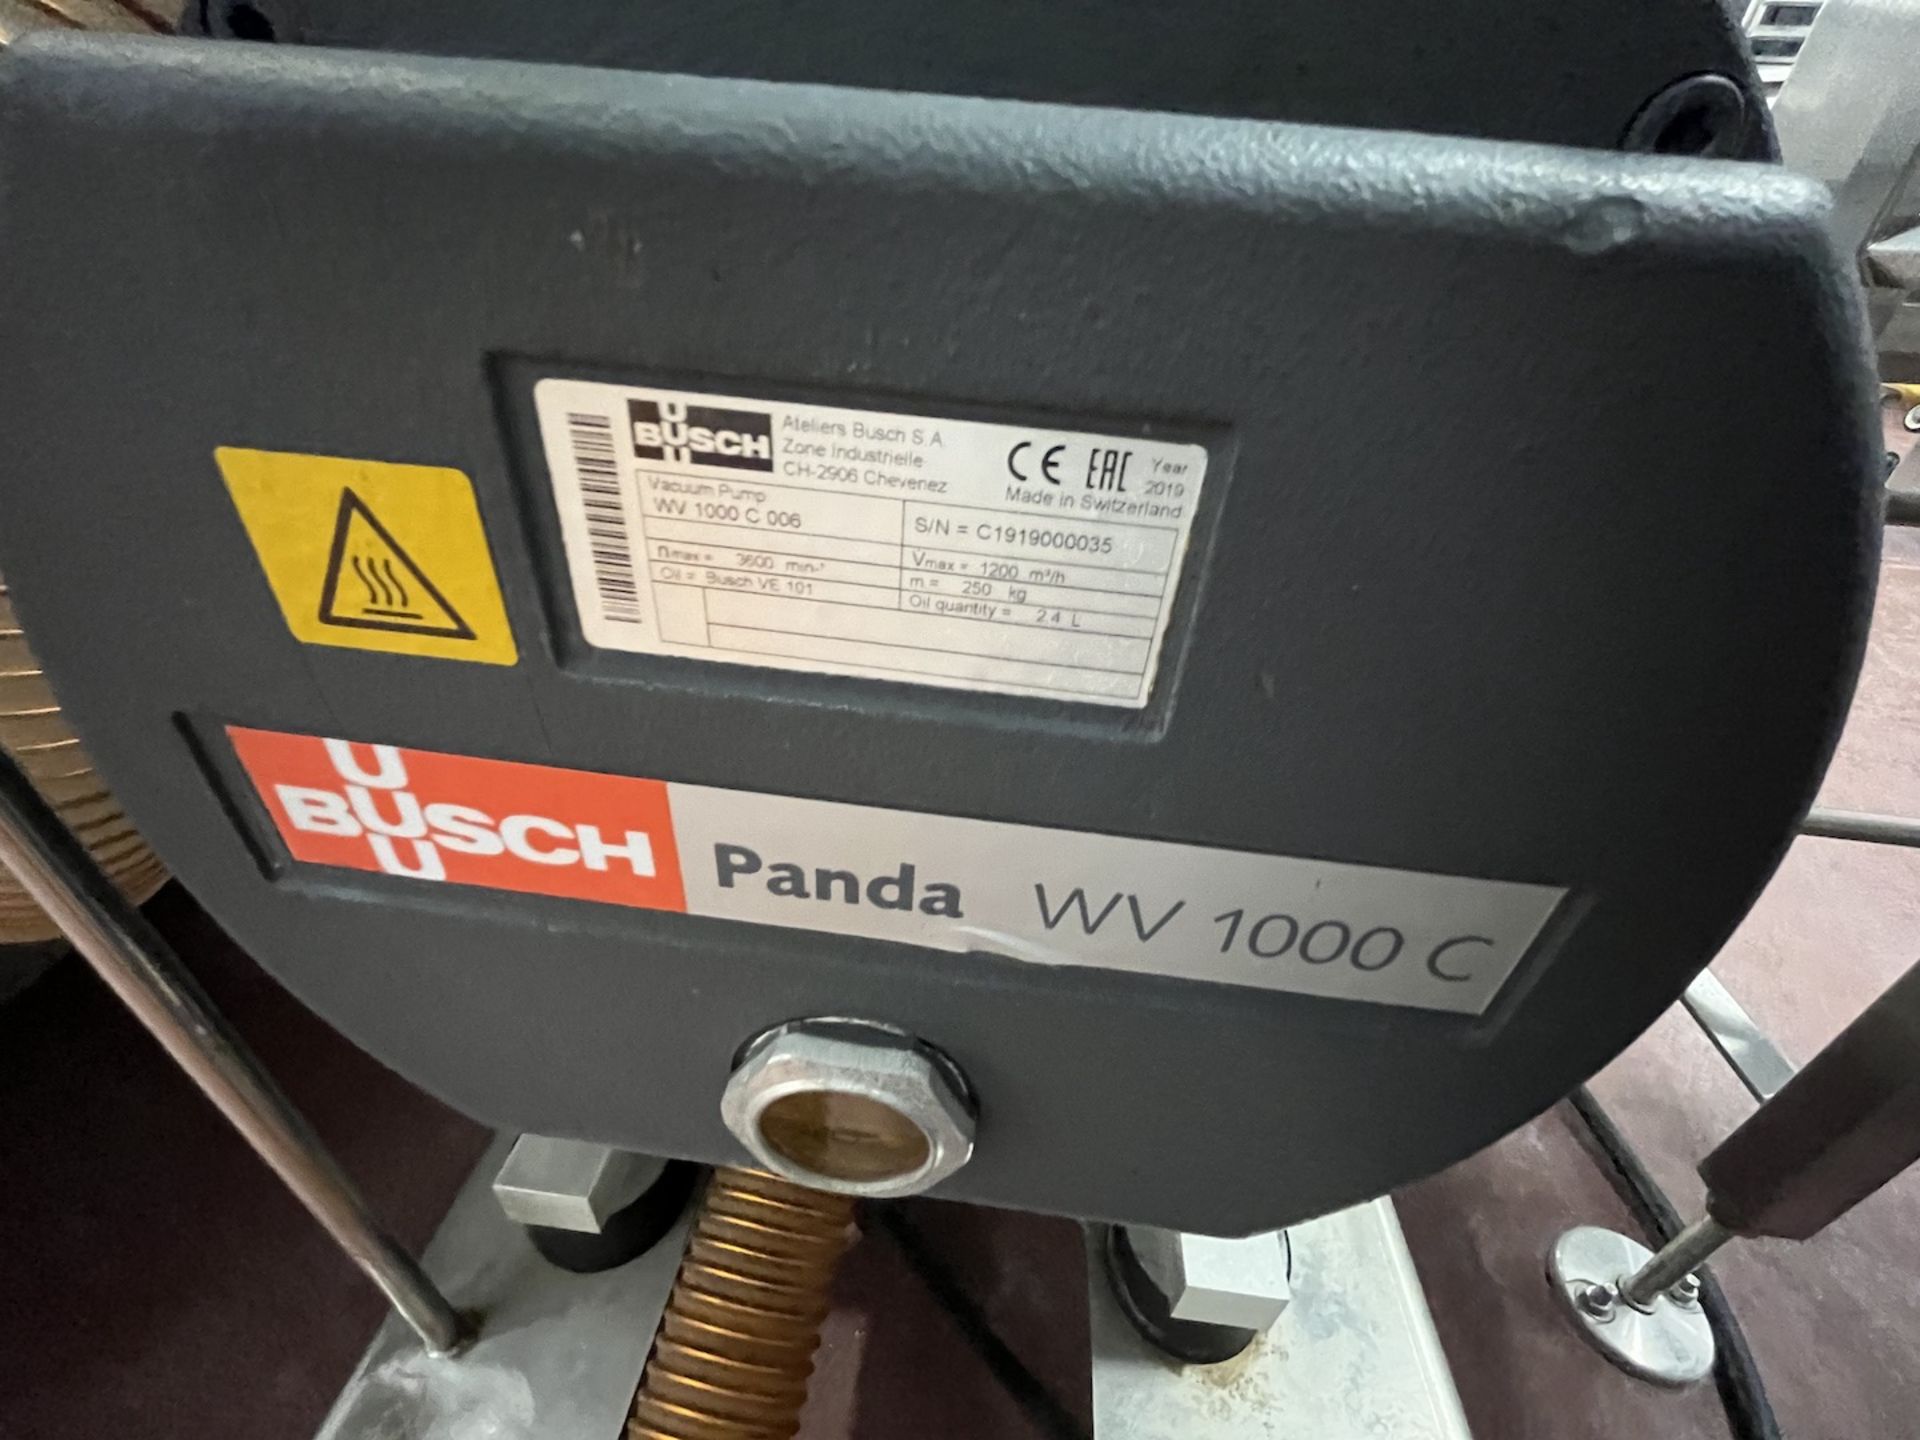 2016 MULTIVAC T-850 TRAY SEALER, S/N 239882, WITH BUSCH VACUUM PUMP, MODEL PANDA WV 1000 C 006,  AND - Image 26 of 36